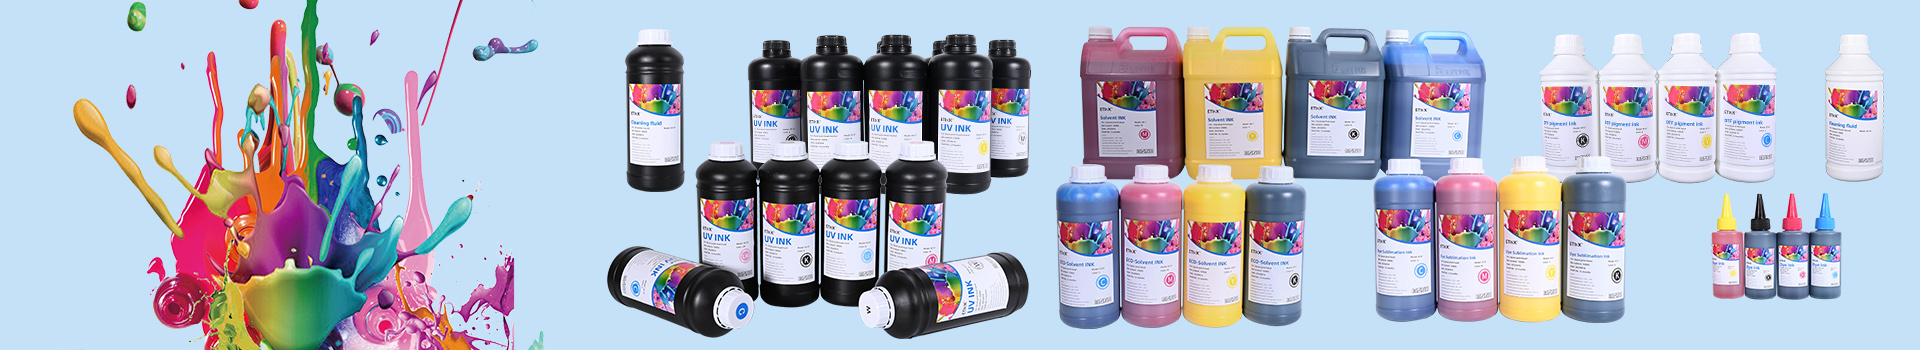 DongGuanYitian Inkjet consumables company limited